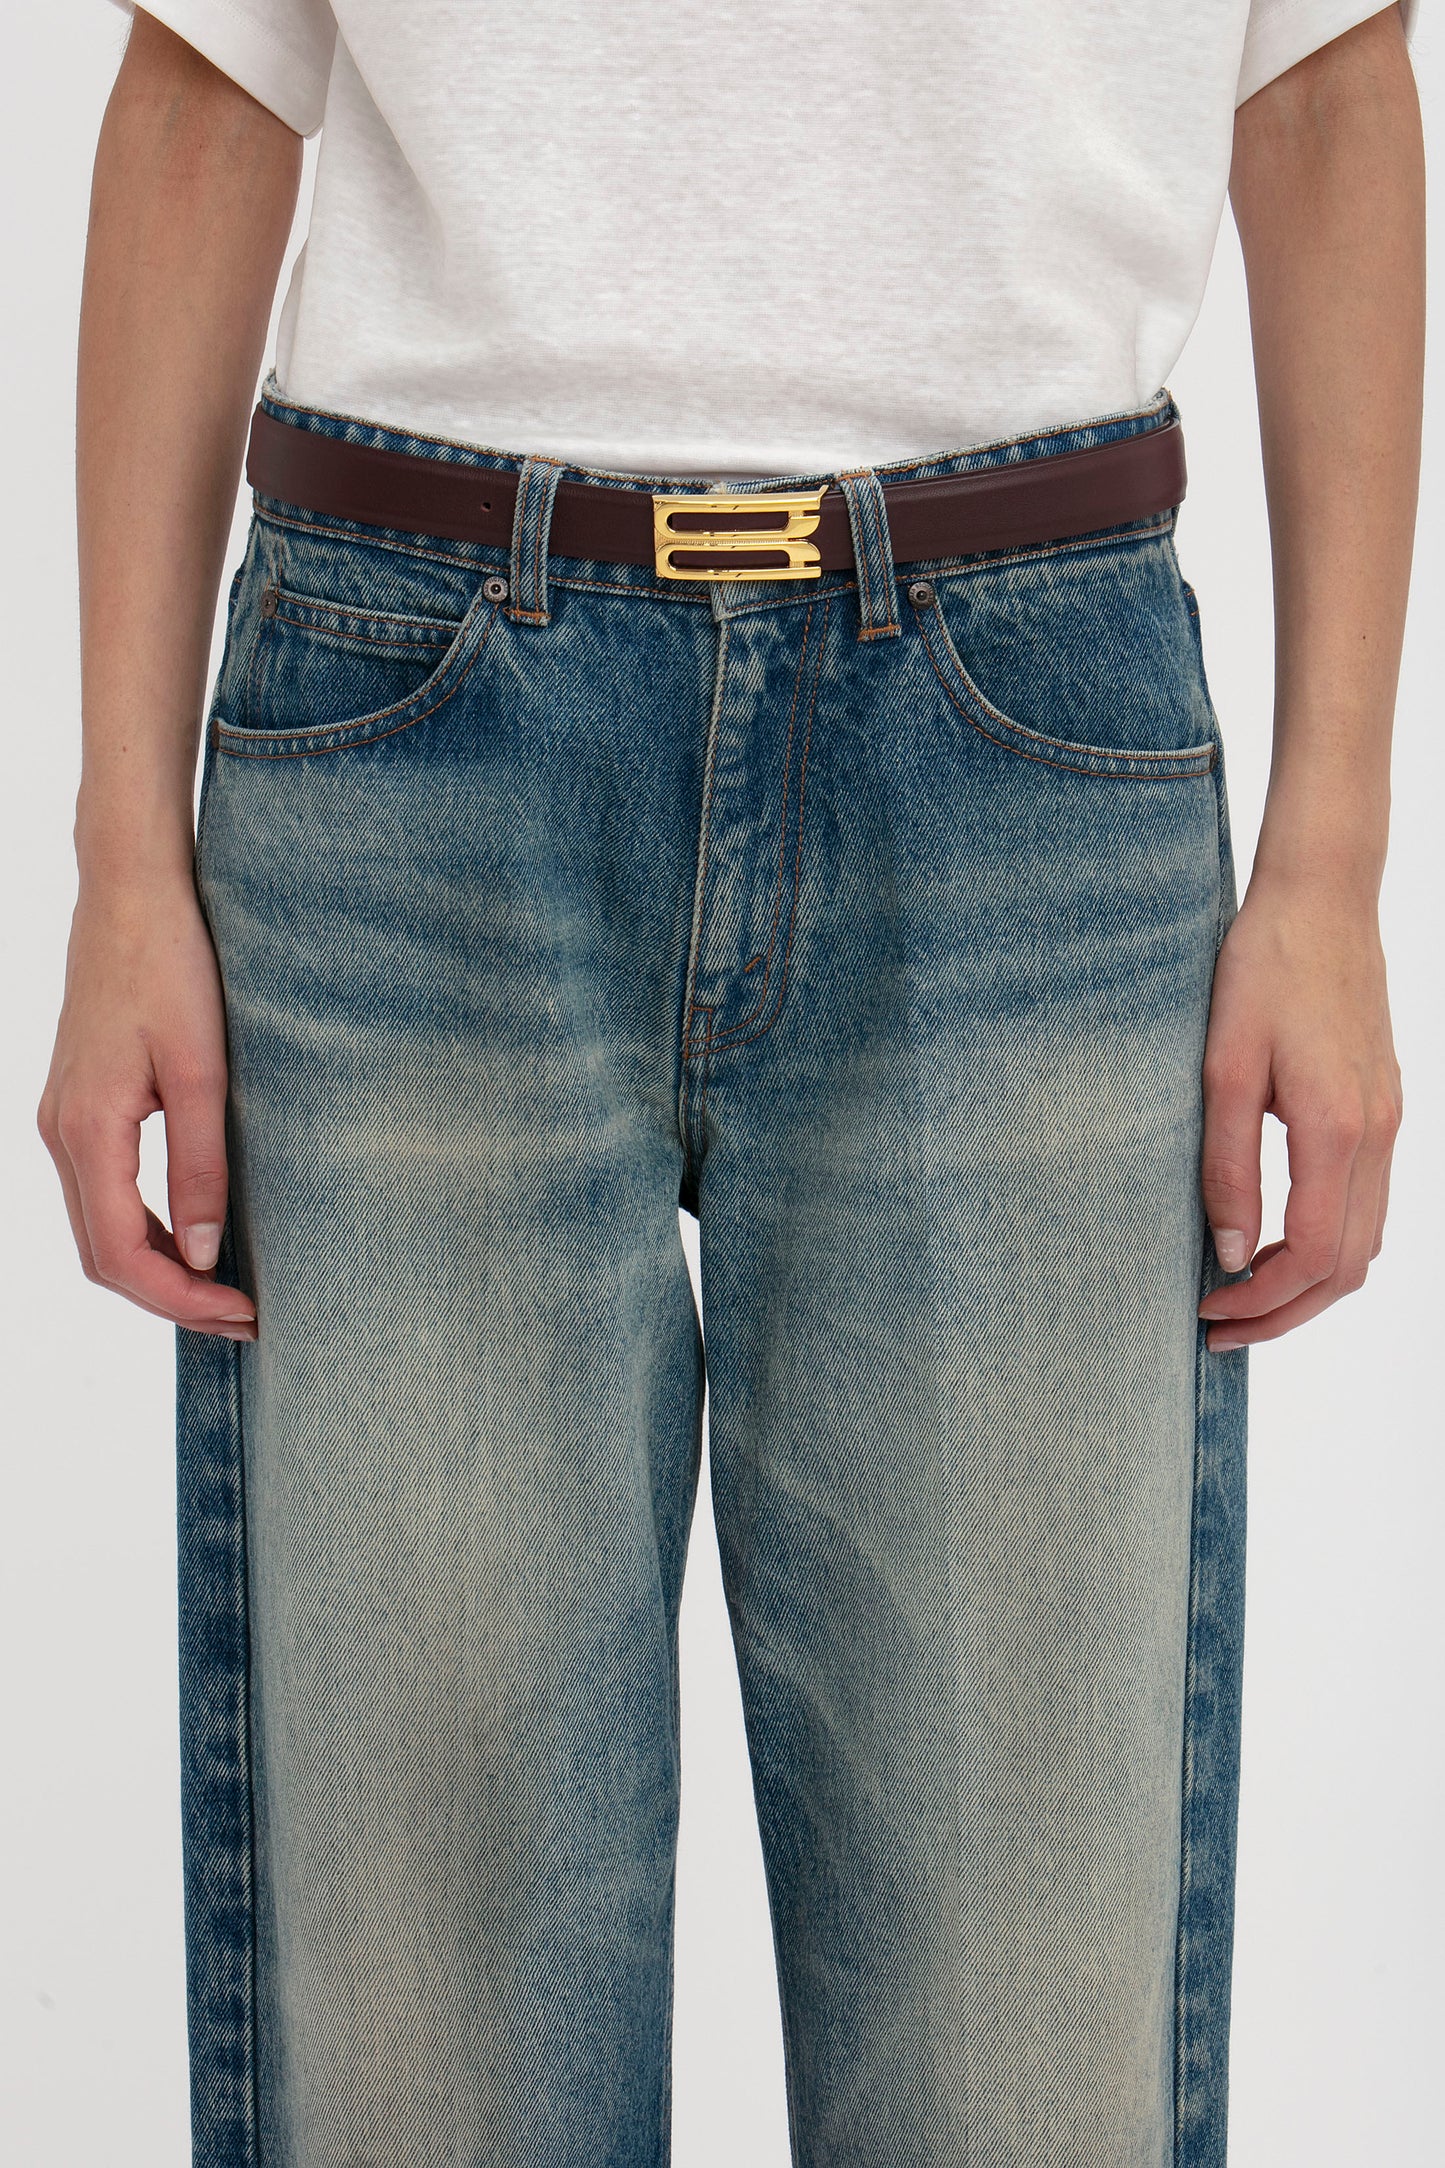 A person wearing blue denim jeans and a white top, with a dark brown Victoria Beckham Frame Belt In Burgundy Leather featuring gold hardware. The view is cropped to show the waist and upper legs.